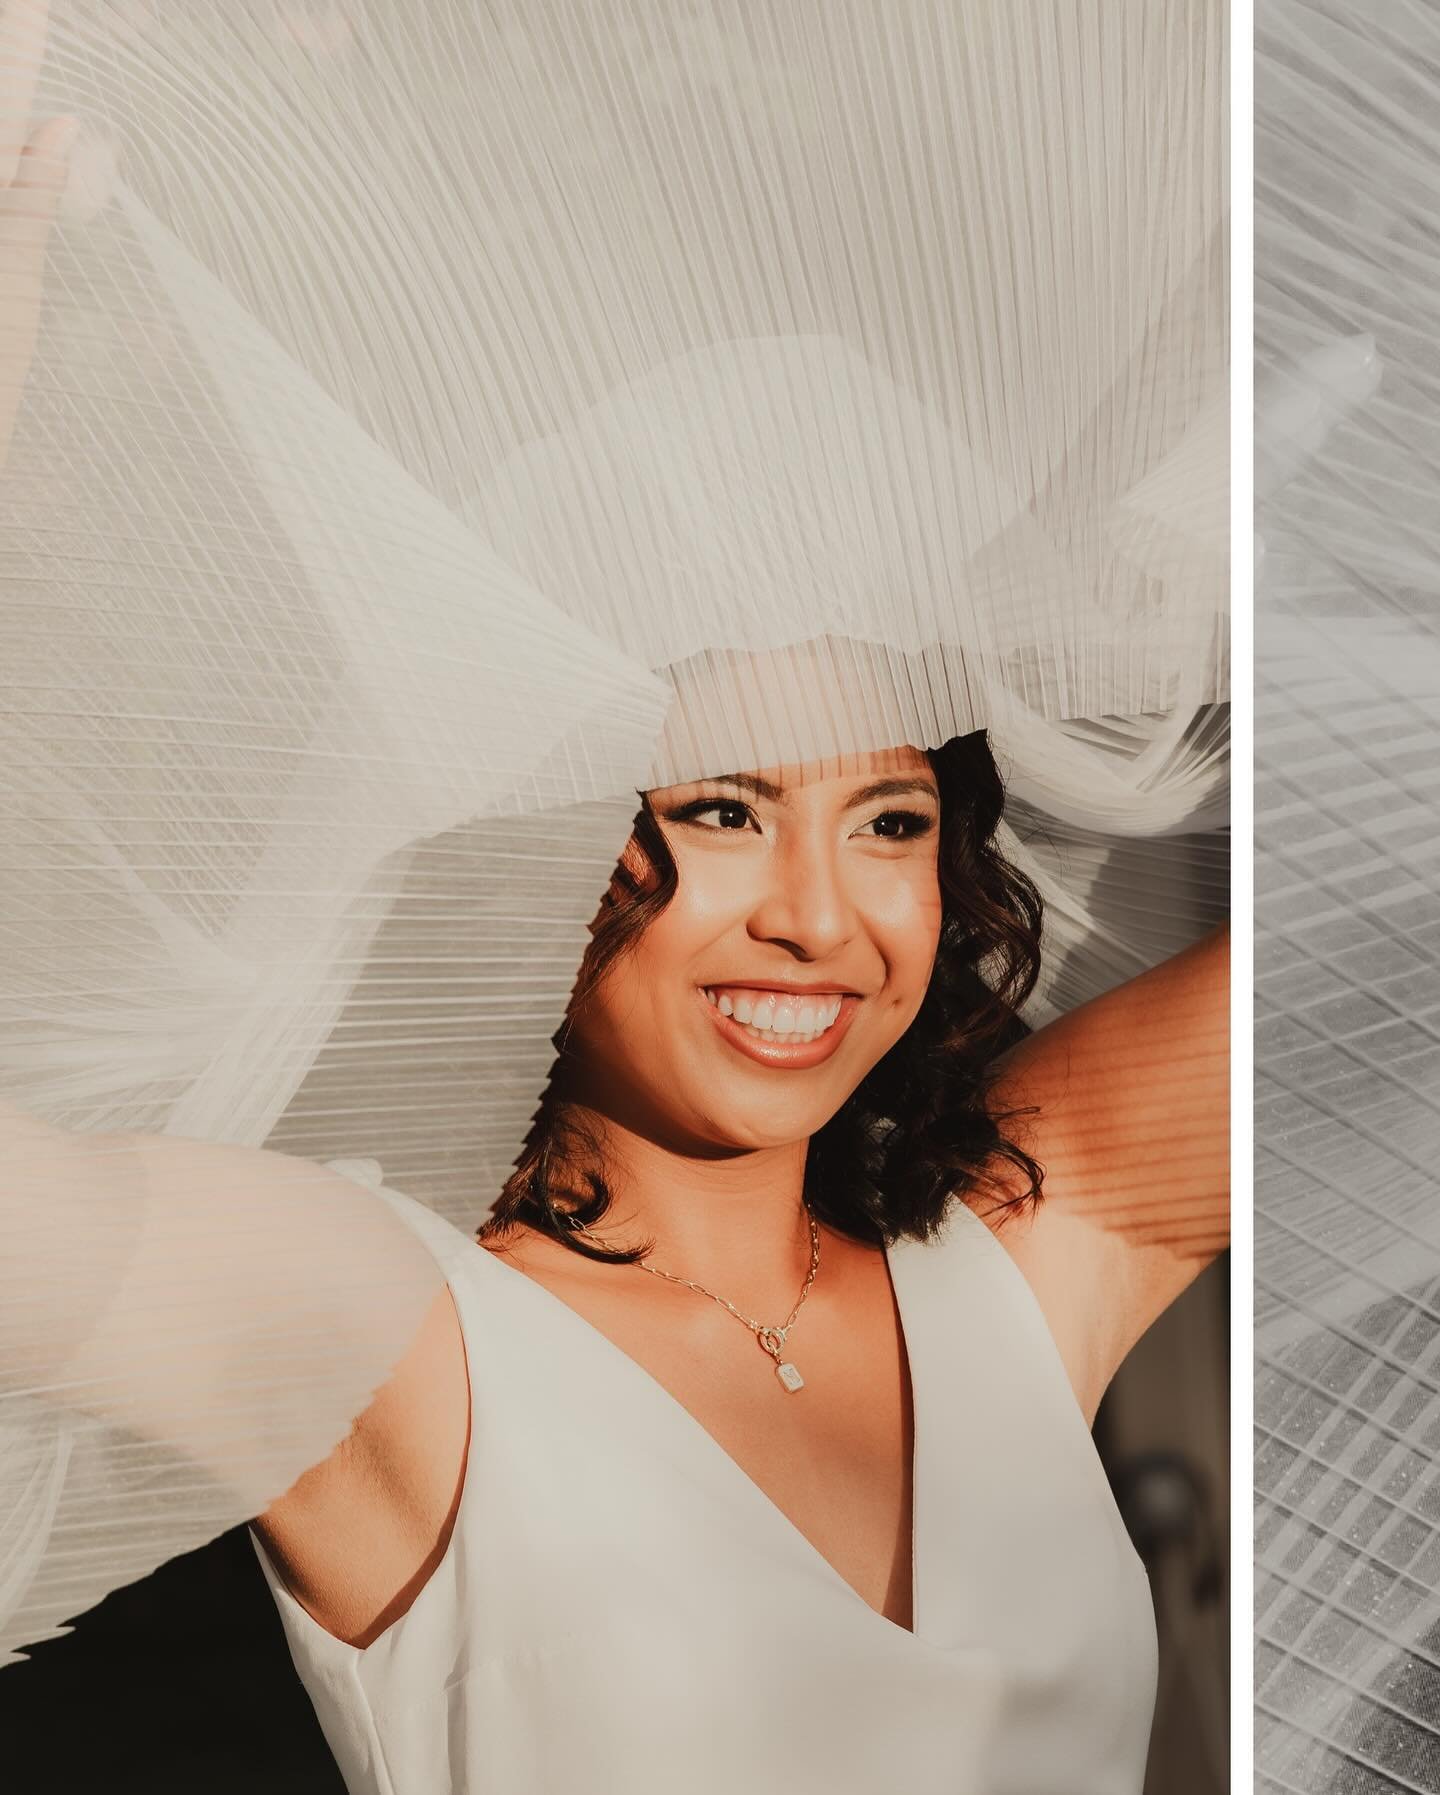 🤍Ladies, let this be your sign to wear that veil🤍

#weddingphotographer #californiaweddingphotographer #bride #veil #socalweddingphotographer #bridestyle